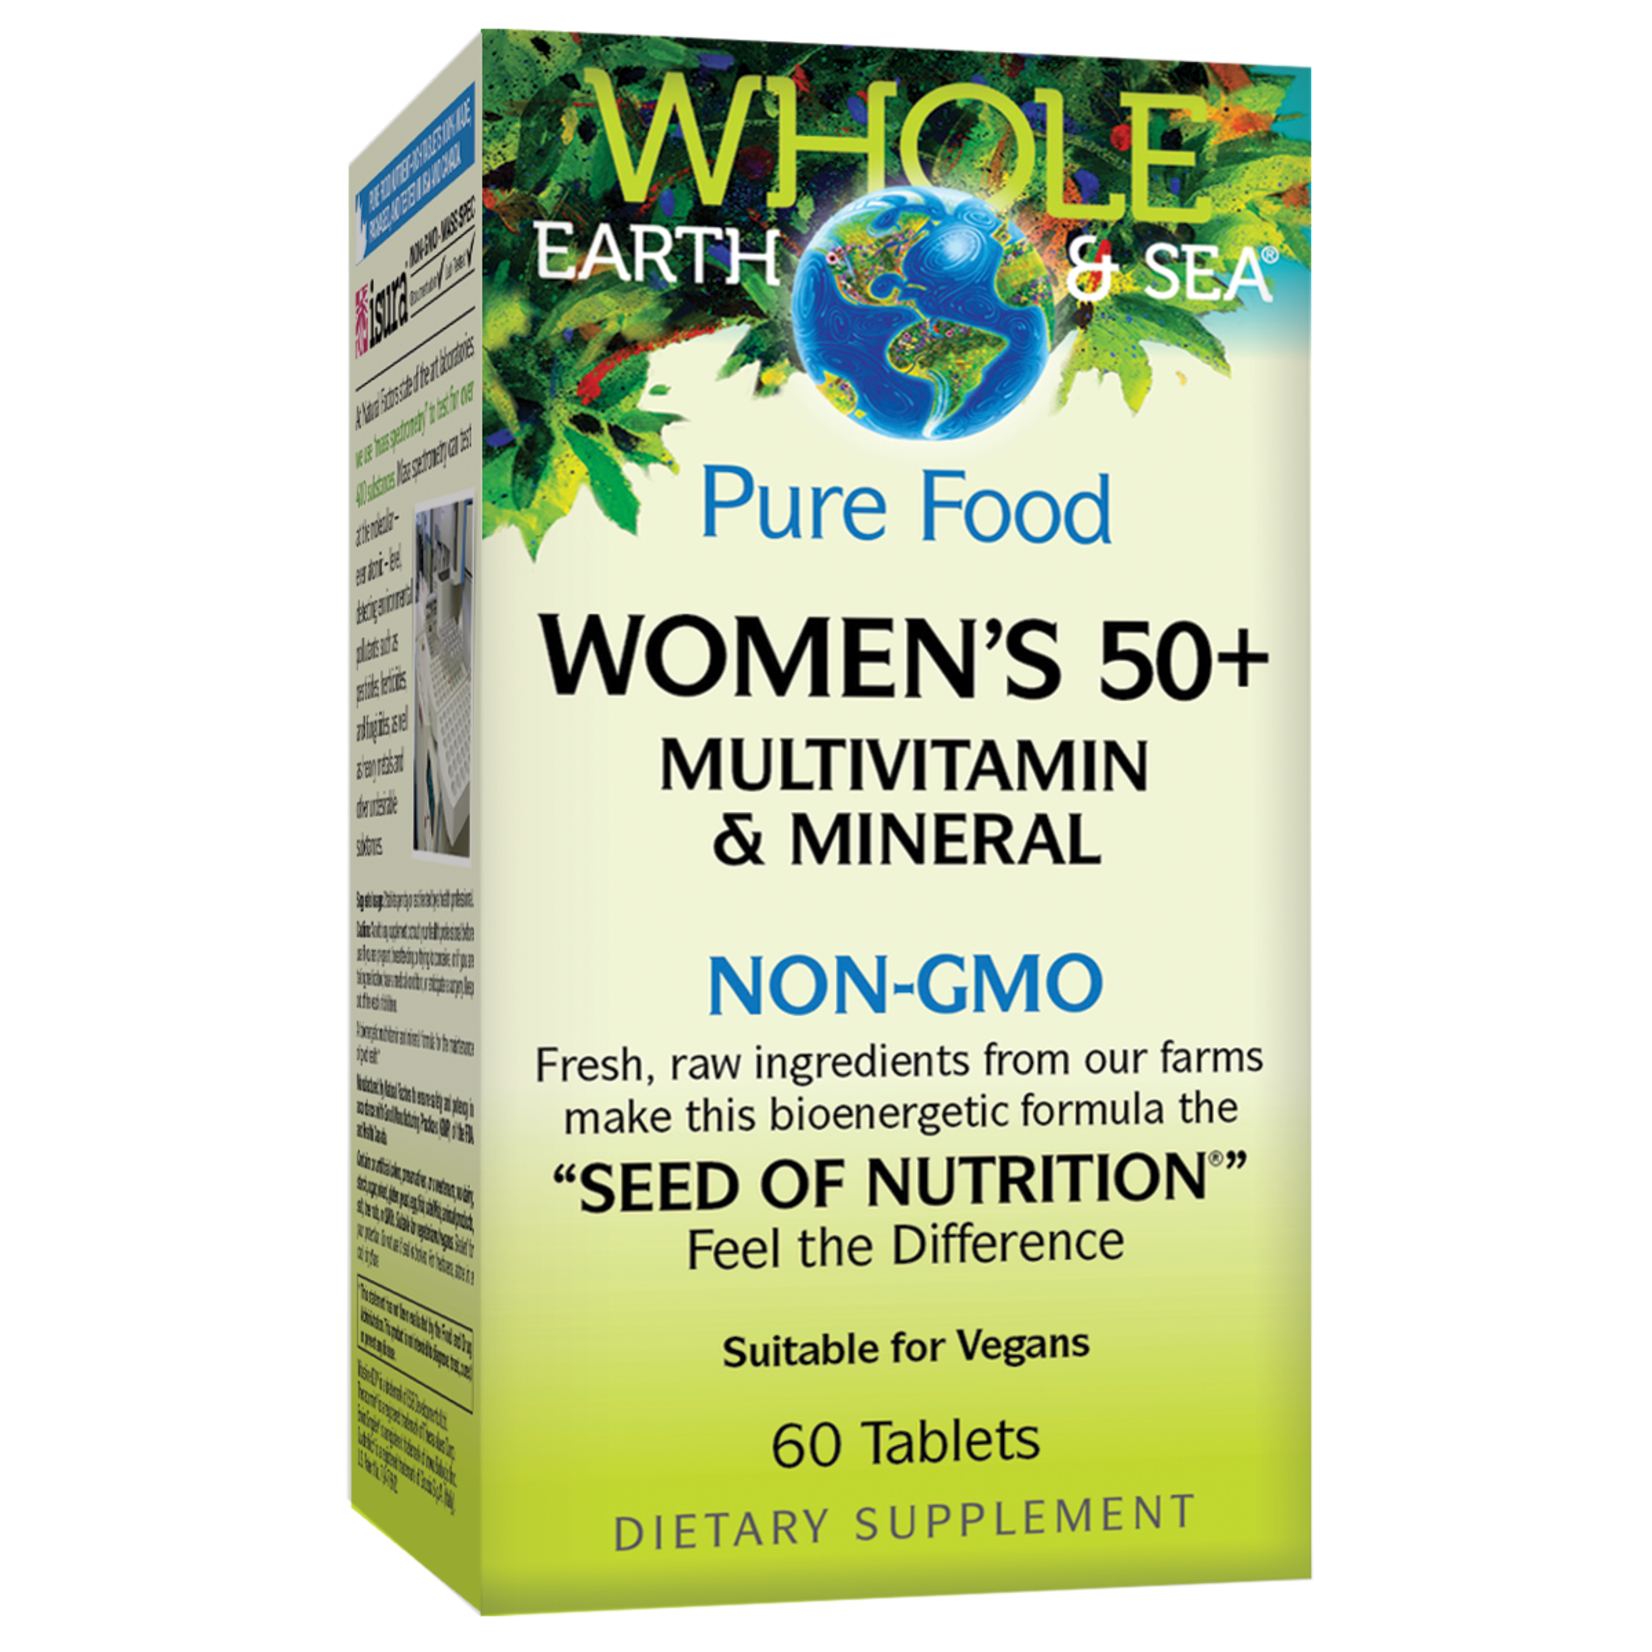 Natural Factors Natural Factors - Whole Earth and Sea Womens 50 + Multi - 120 Tablets